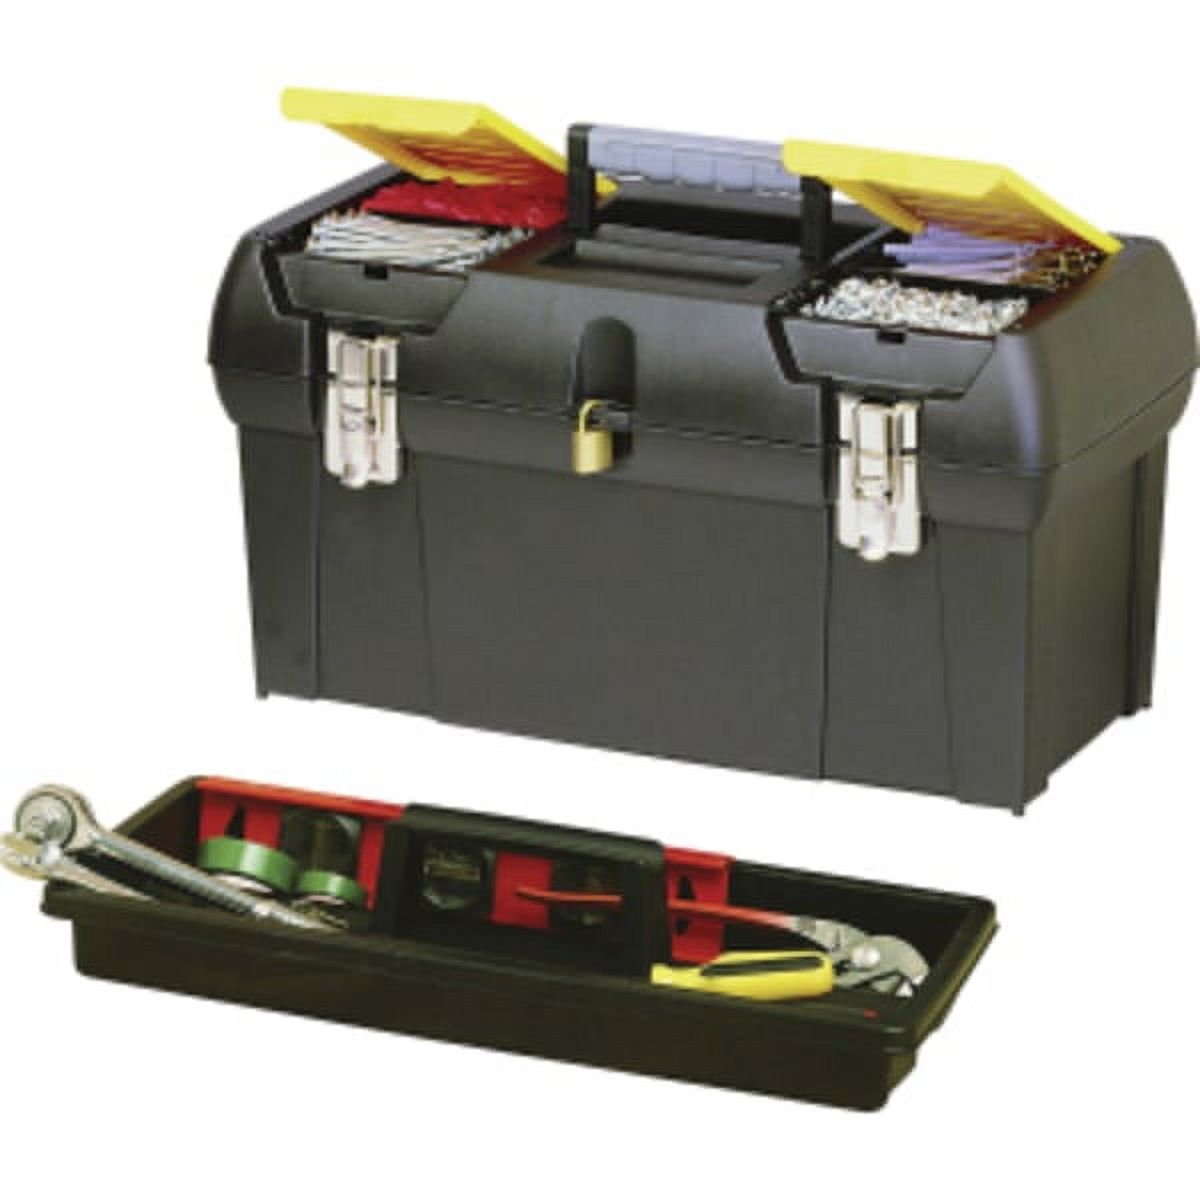 Stanley STST19005 19-Inch Tool Box - image 2 of 2